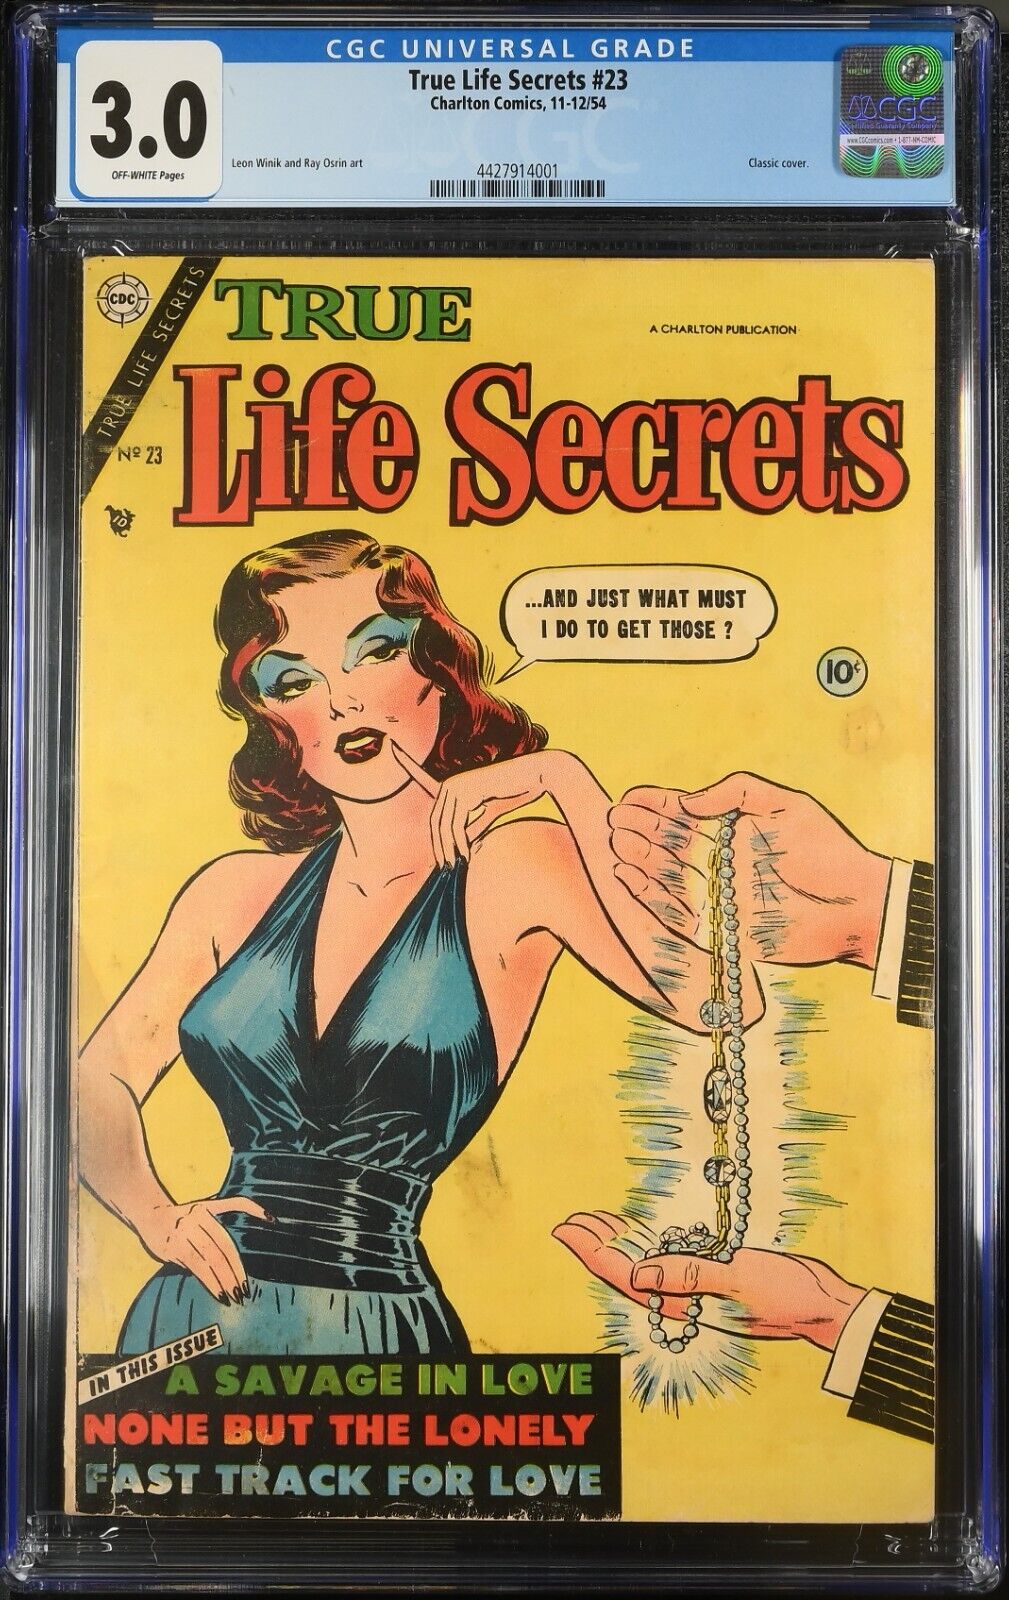 TRUE LIFE SECRETS 23 CGC 3.0 V1 CHARLTON 1954 CLASSIC PEARL NECKLACE COVER WOW